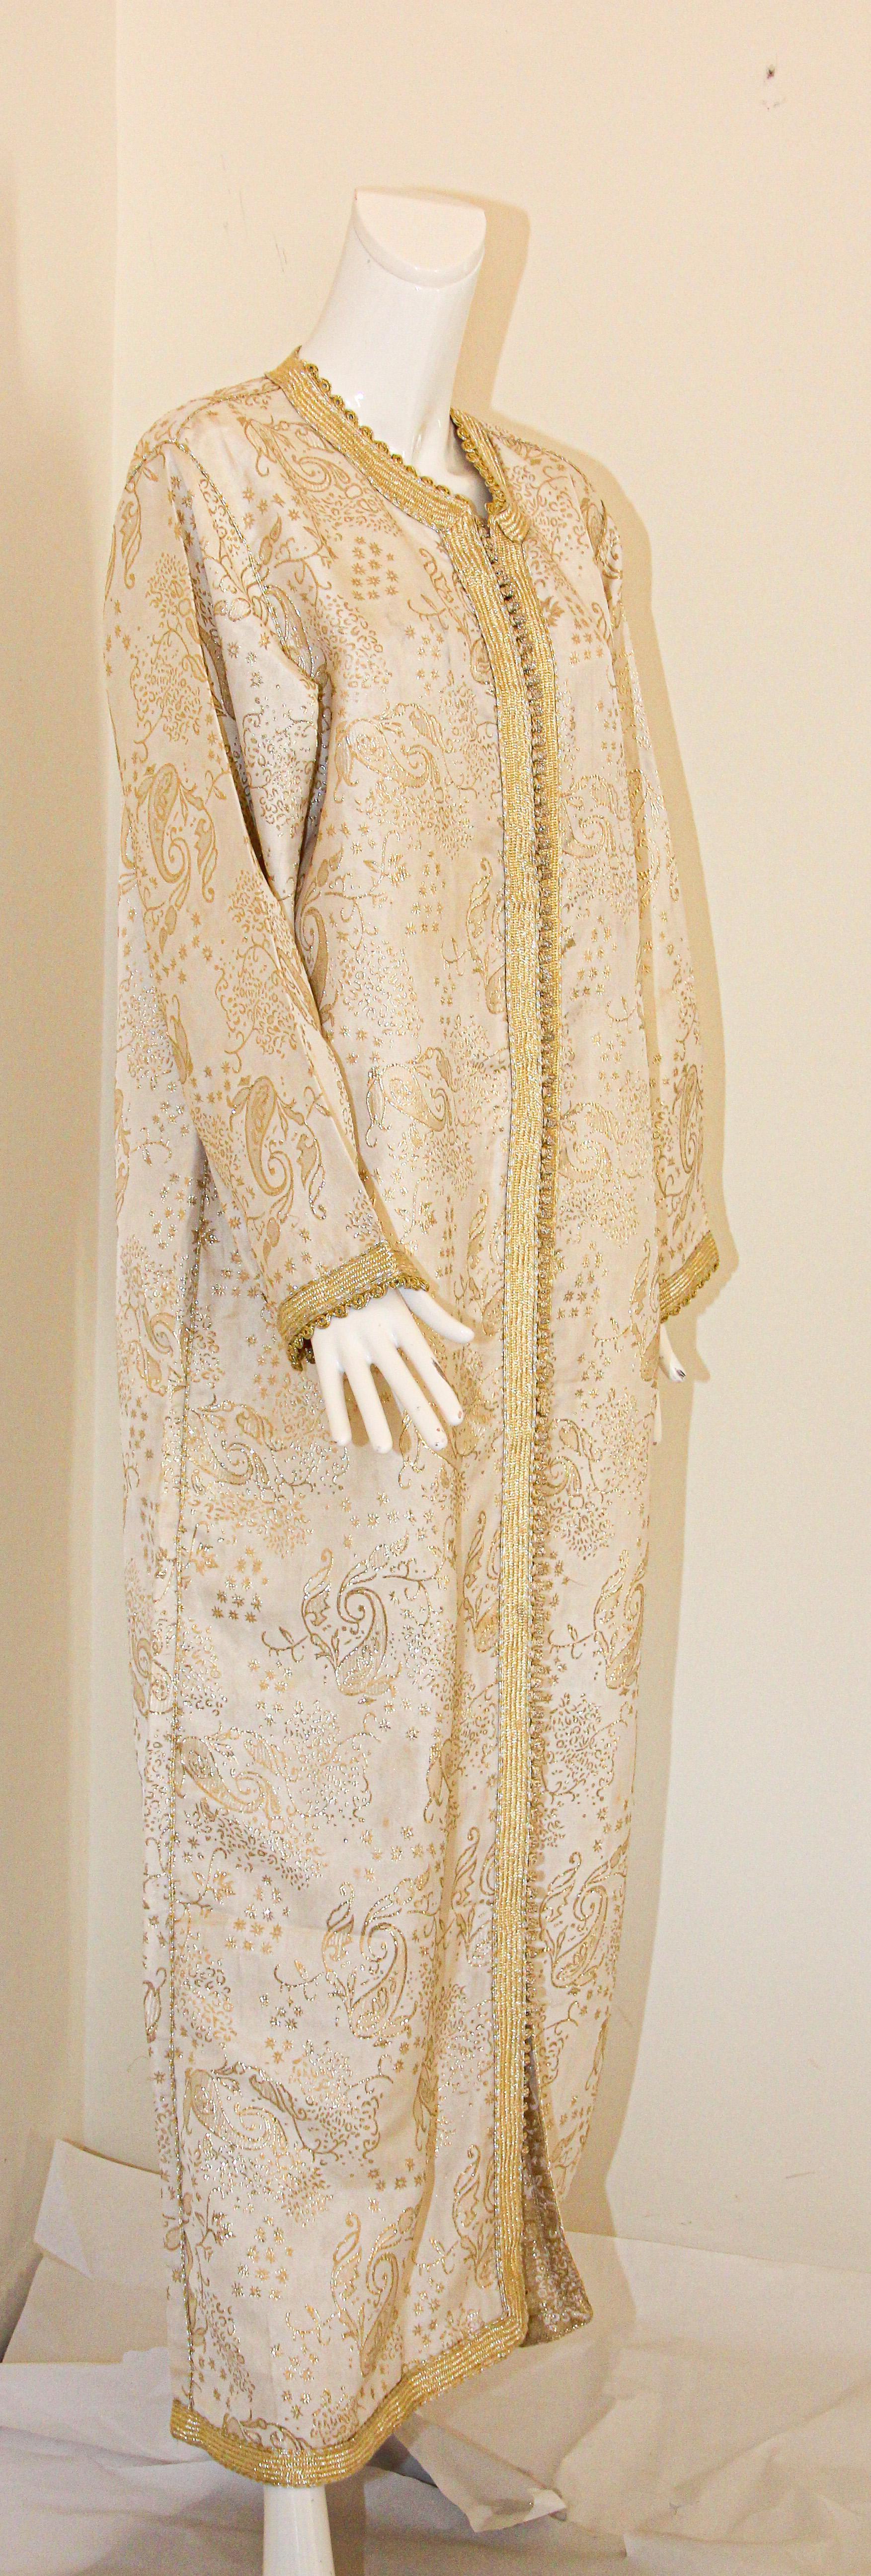 Beige Elegant Moroccan White Caftan with Gold Metallic Floral Brocade For Sale